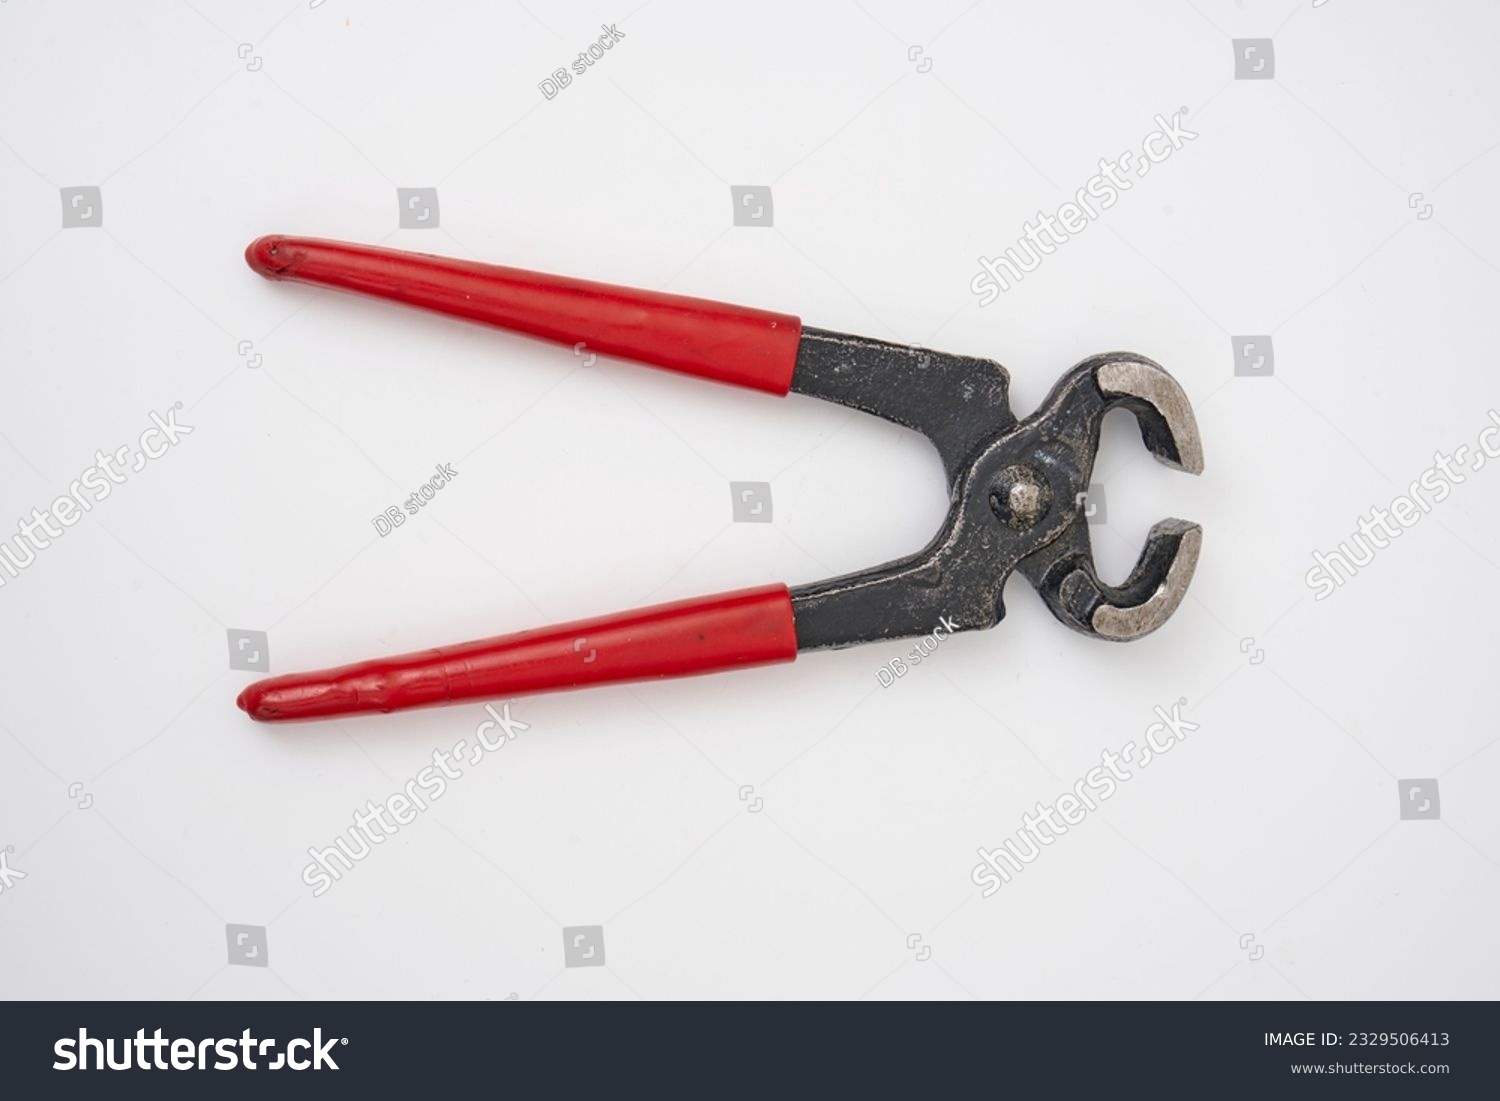 2nd hand pliers with a red plastic handle on a white isolated background                                #2329506413